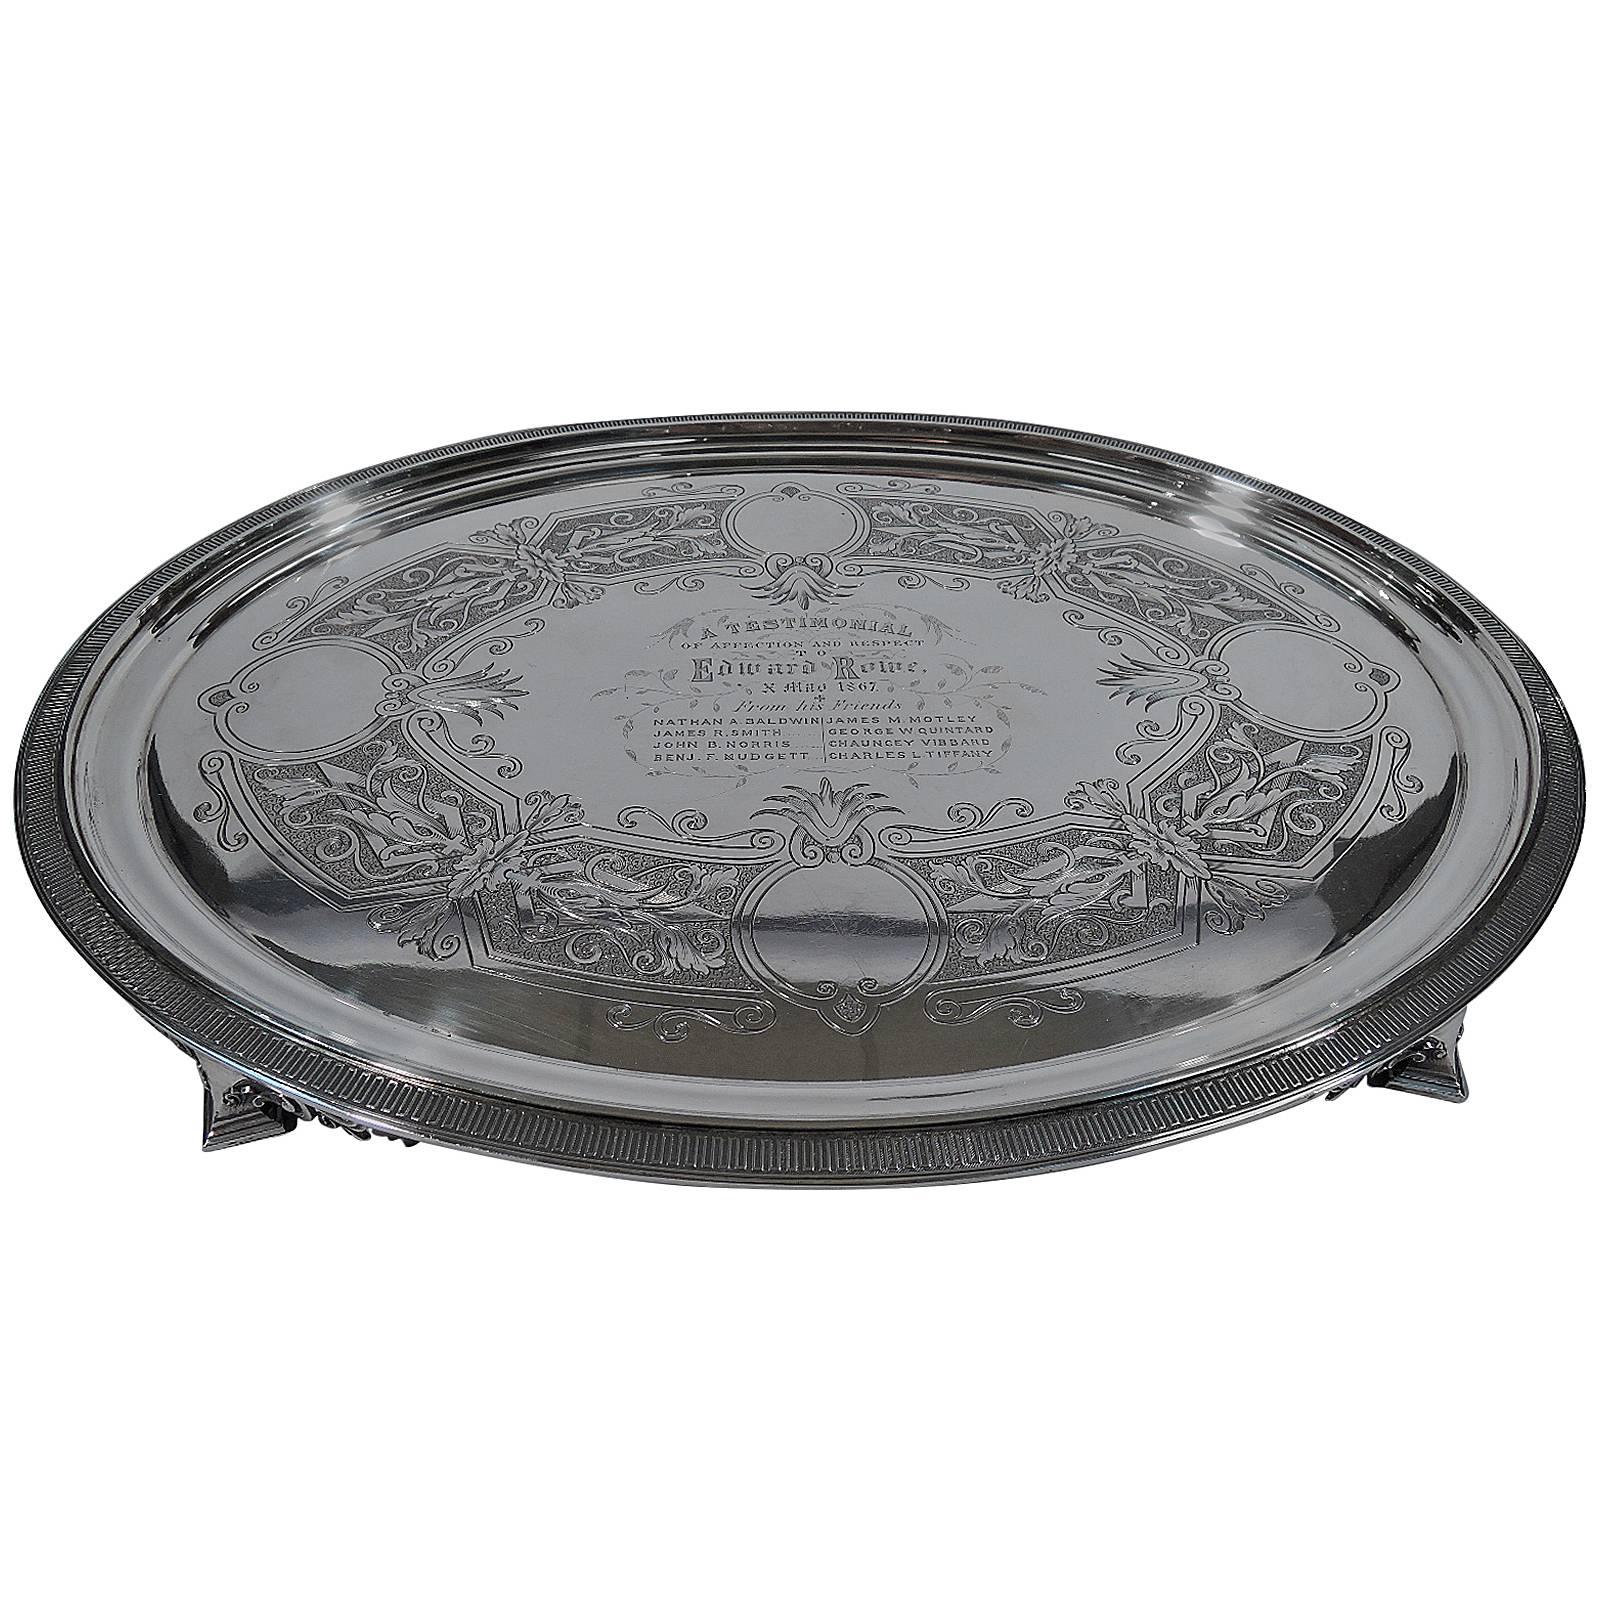 Historic Tiffany Sterling Silver Salver Tray with Broadway Hallmark